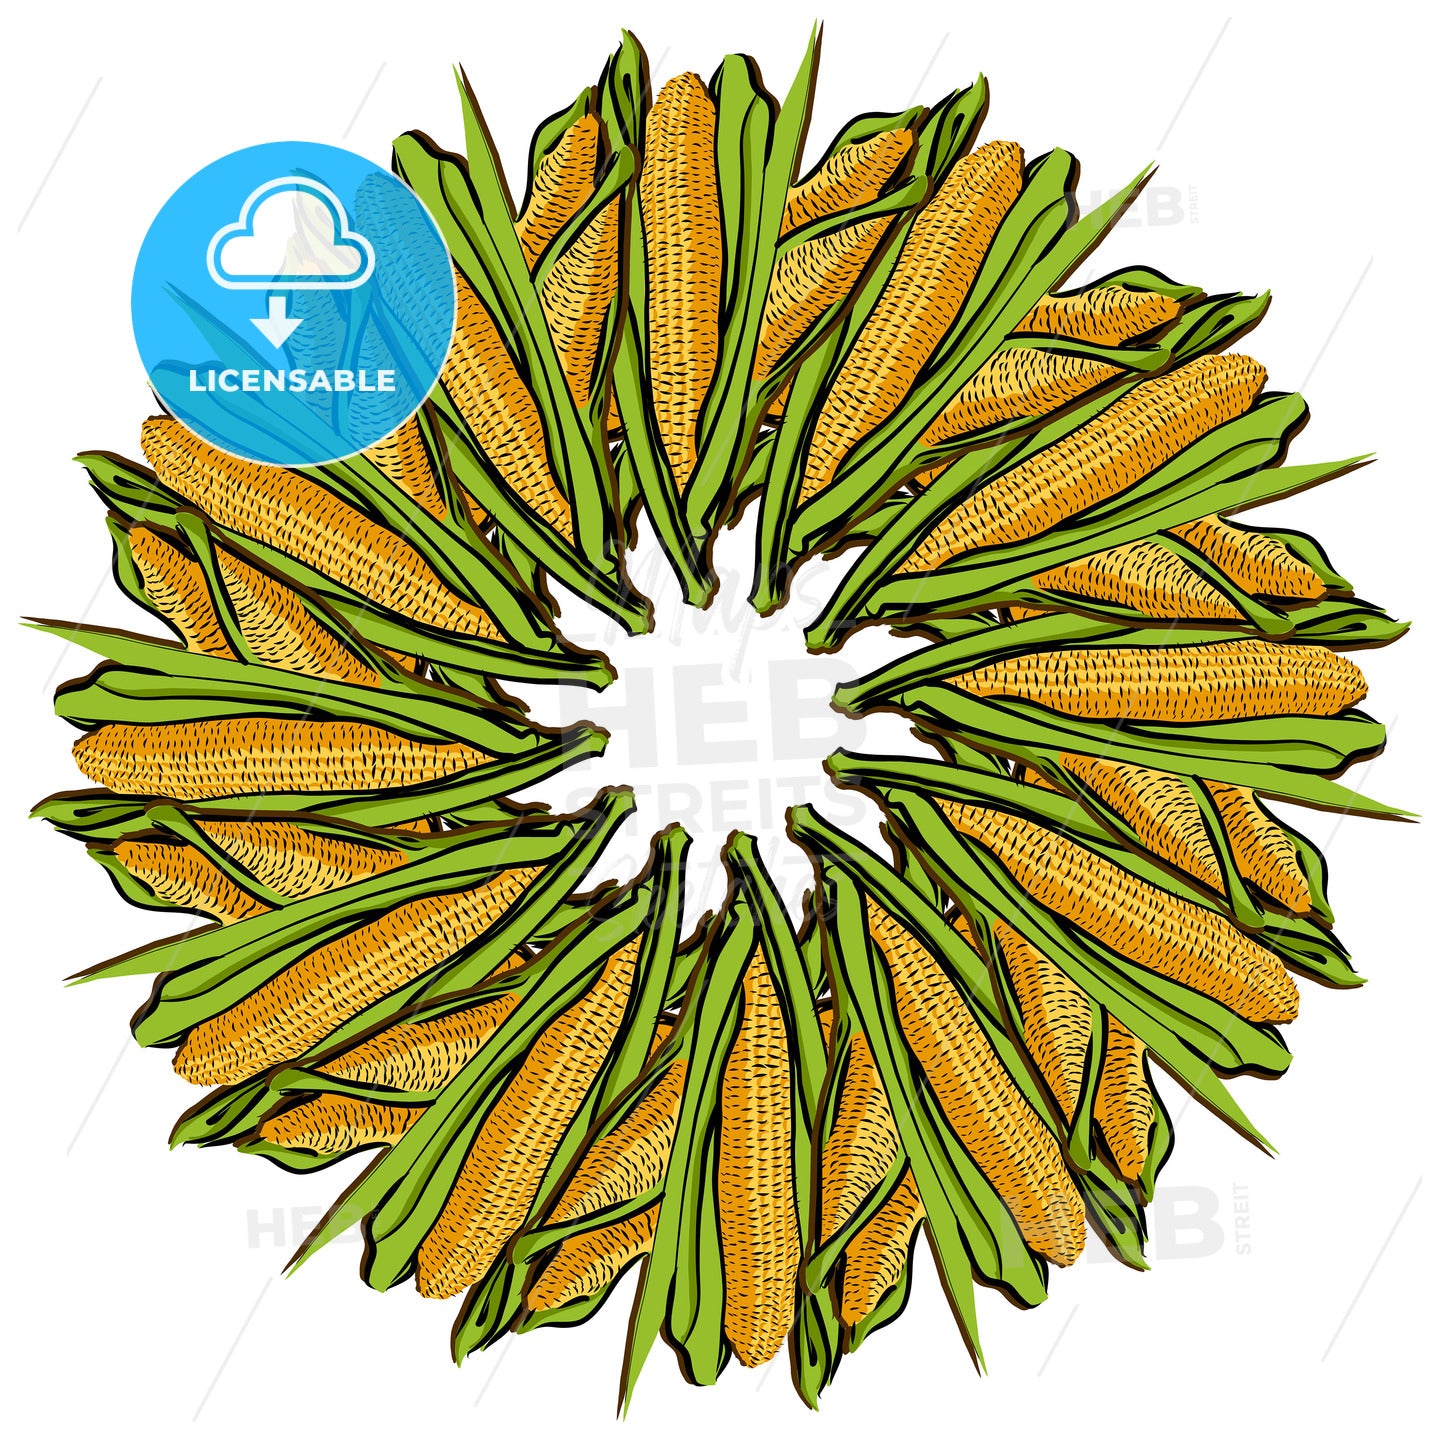 Many Corncob arranged in a circle on white – instant download